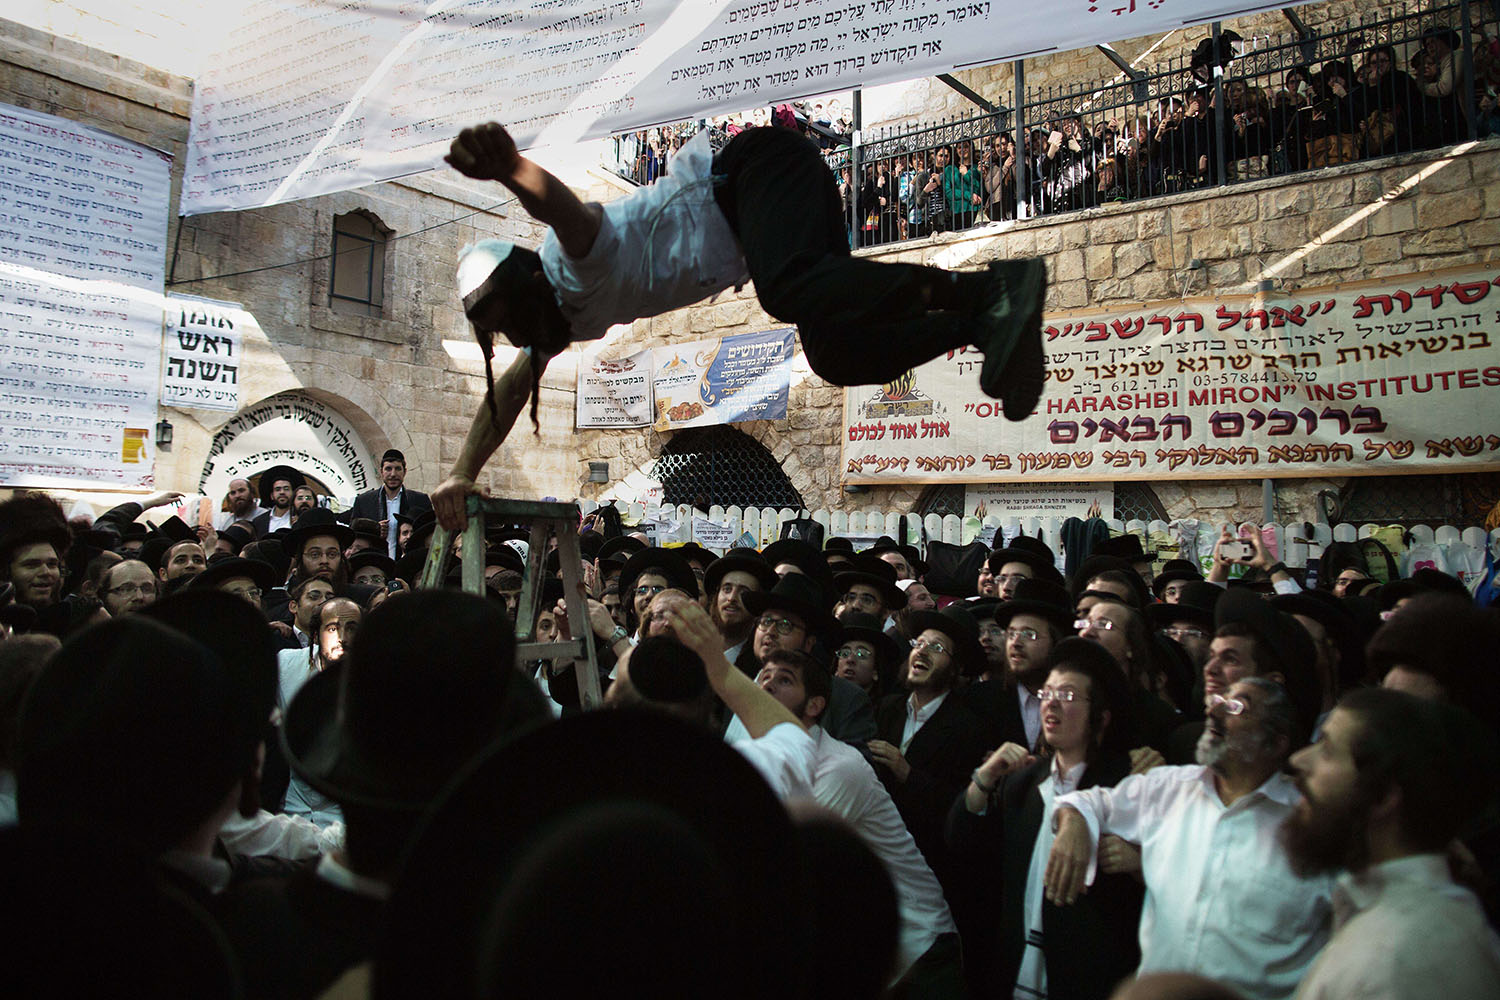 Ultra-Orthodox Jews dance at the grave site of Rabbi Shimon Bar Yochai in the northern Israeli village of Meron on May 18, 2014, at the start of the day-long holiday of Lag Baomer that commemorates the Jewish scholar's death.